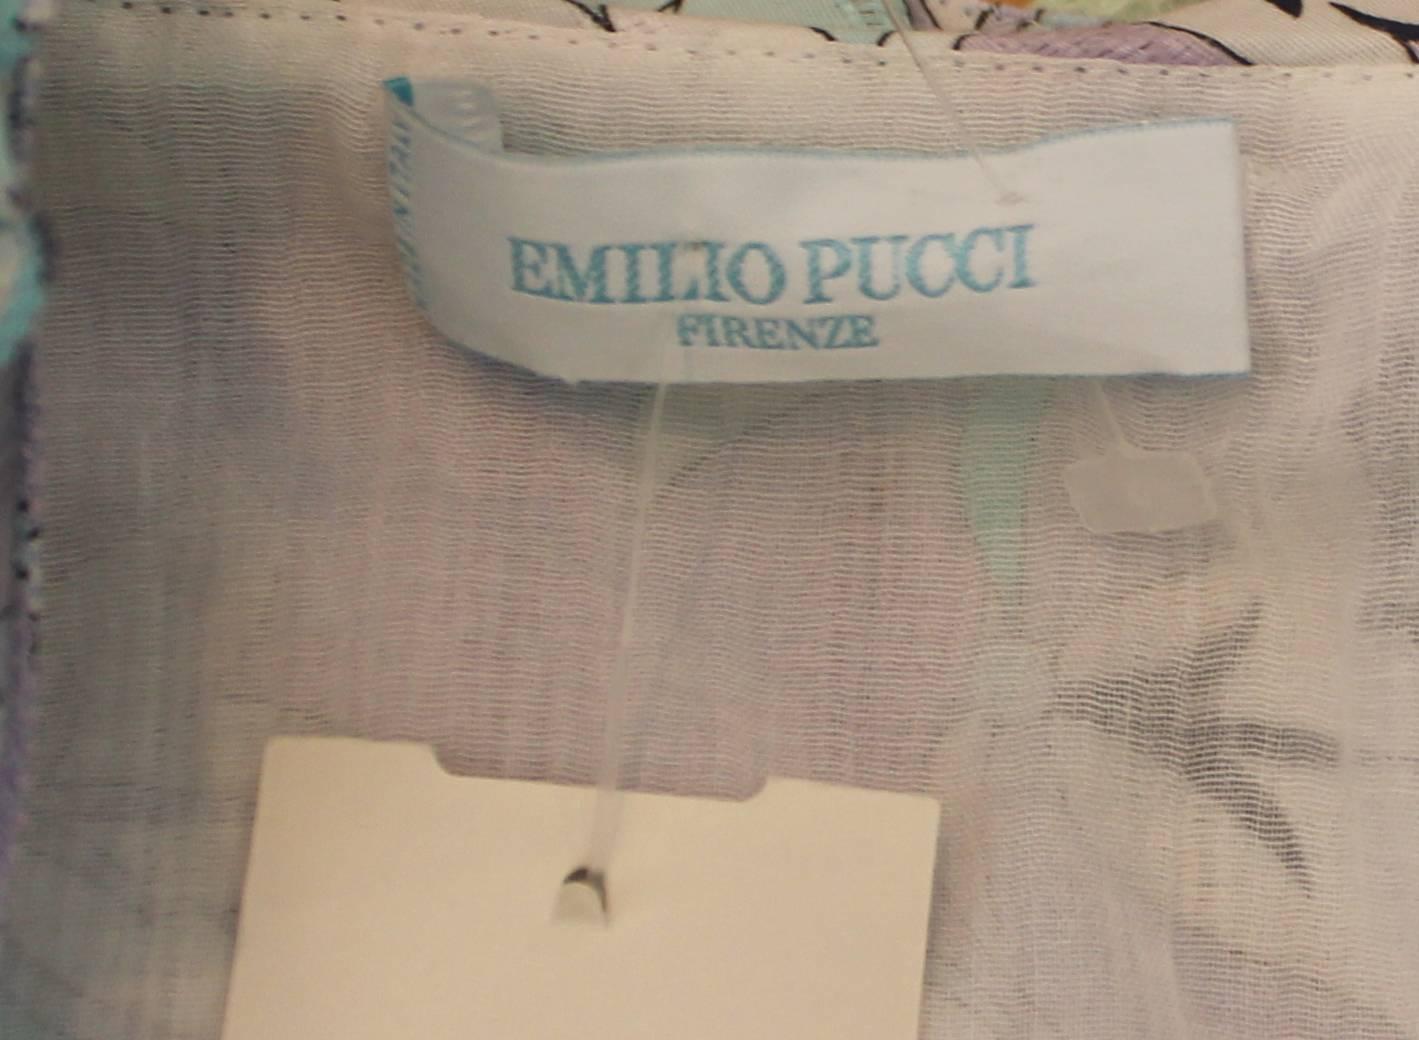 Emilio Pucci Floral Printed Pastel Blue and Lavender Cotton Dress - 4 In Excellent Condition For Sale In West Palm Beach, FL